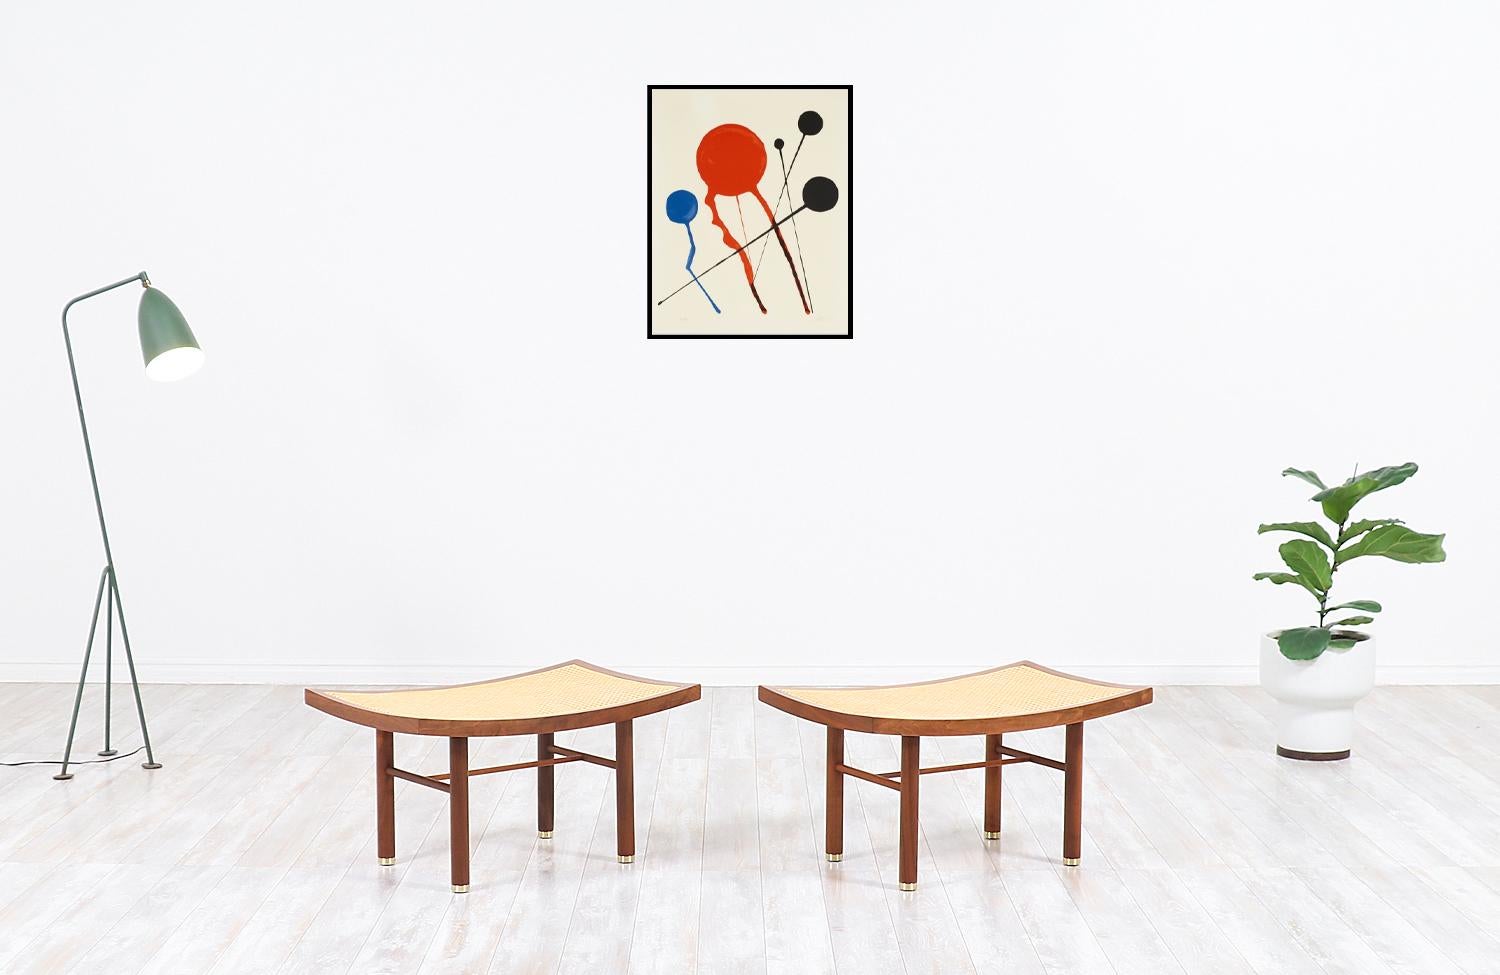 A stylish pair of cane stools designed by Michael Taylor in collaboration with Baker Furniture Co. in the United States, circa 1950s. These iconic and elegant stools feature a solid walnut construction with polished brass sabots and new caning for